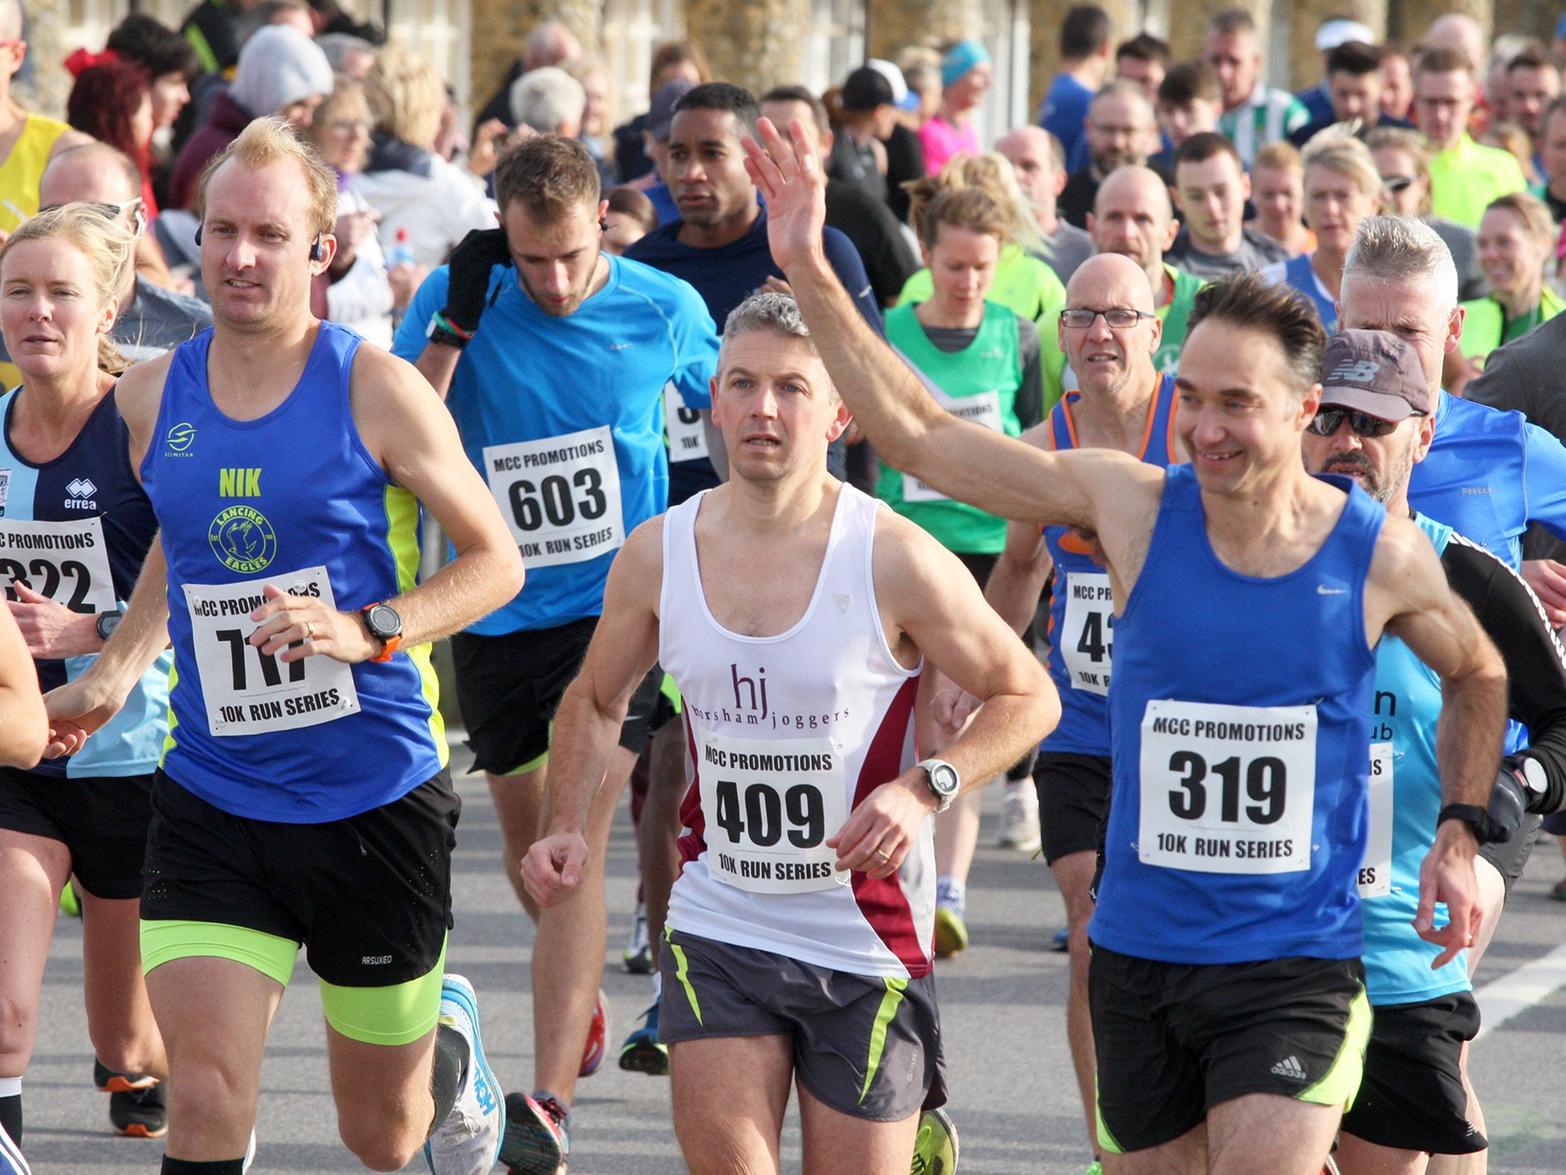 Action from the Worthing Seafront 10k